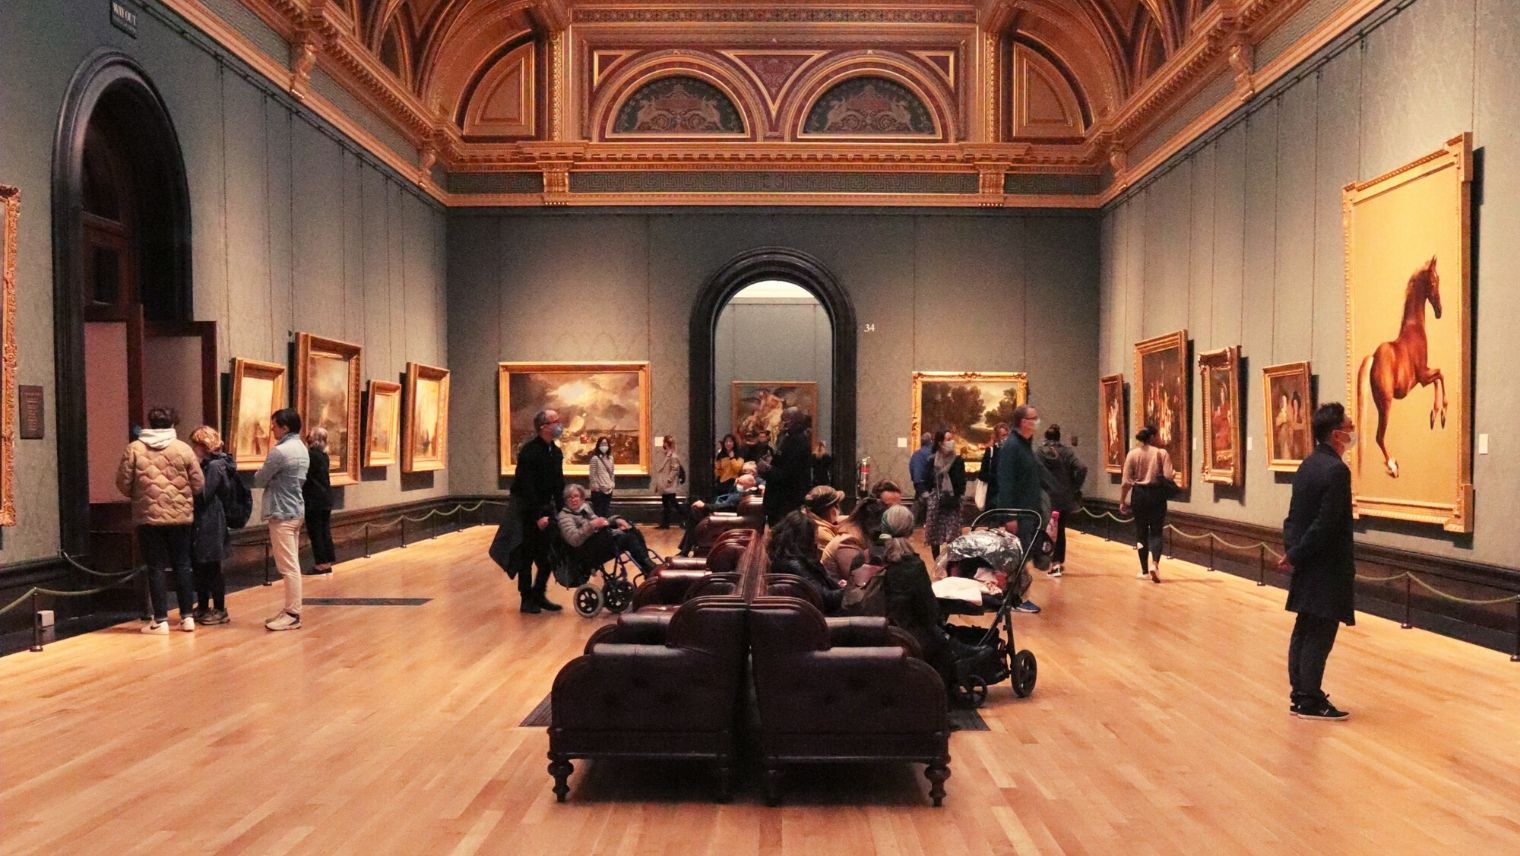 Interior of the National Gallery